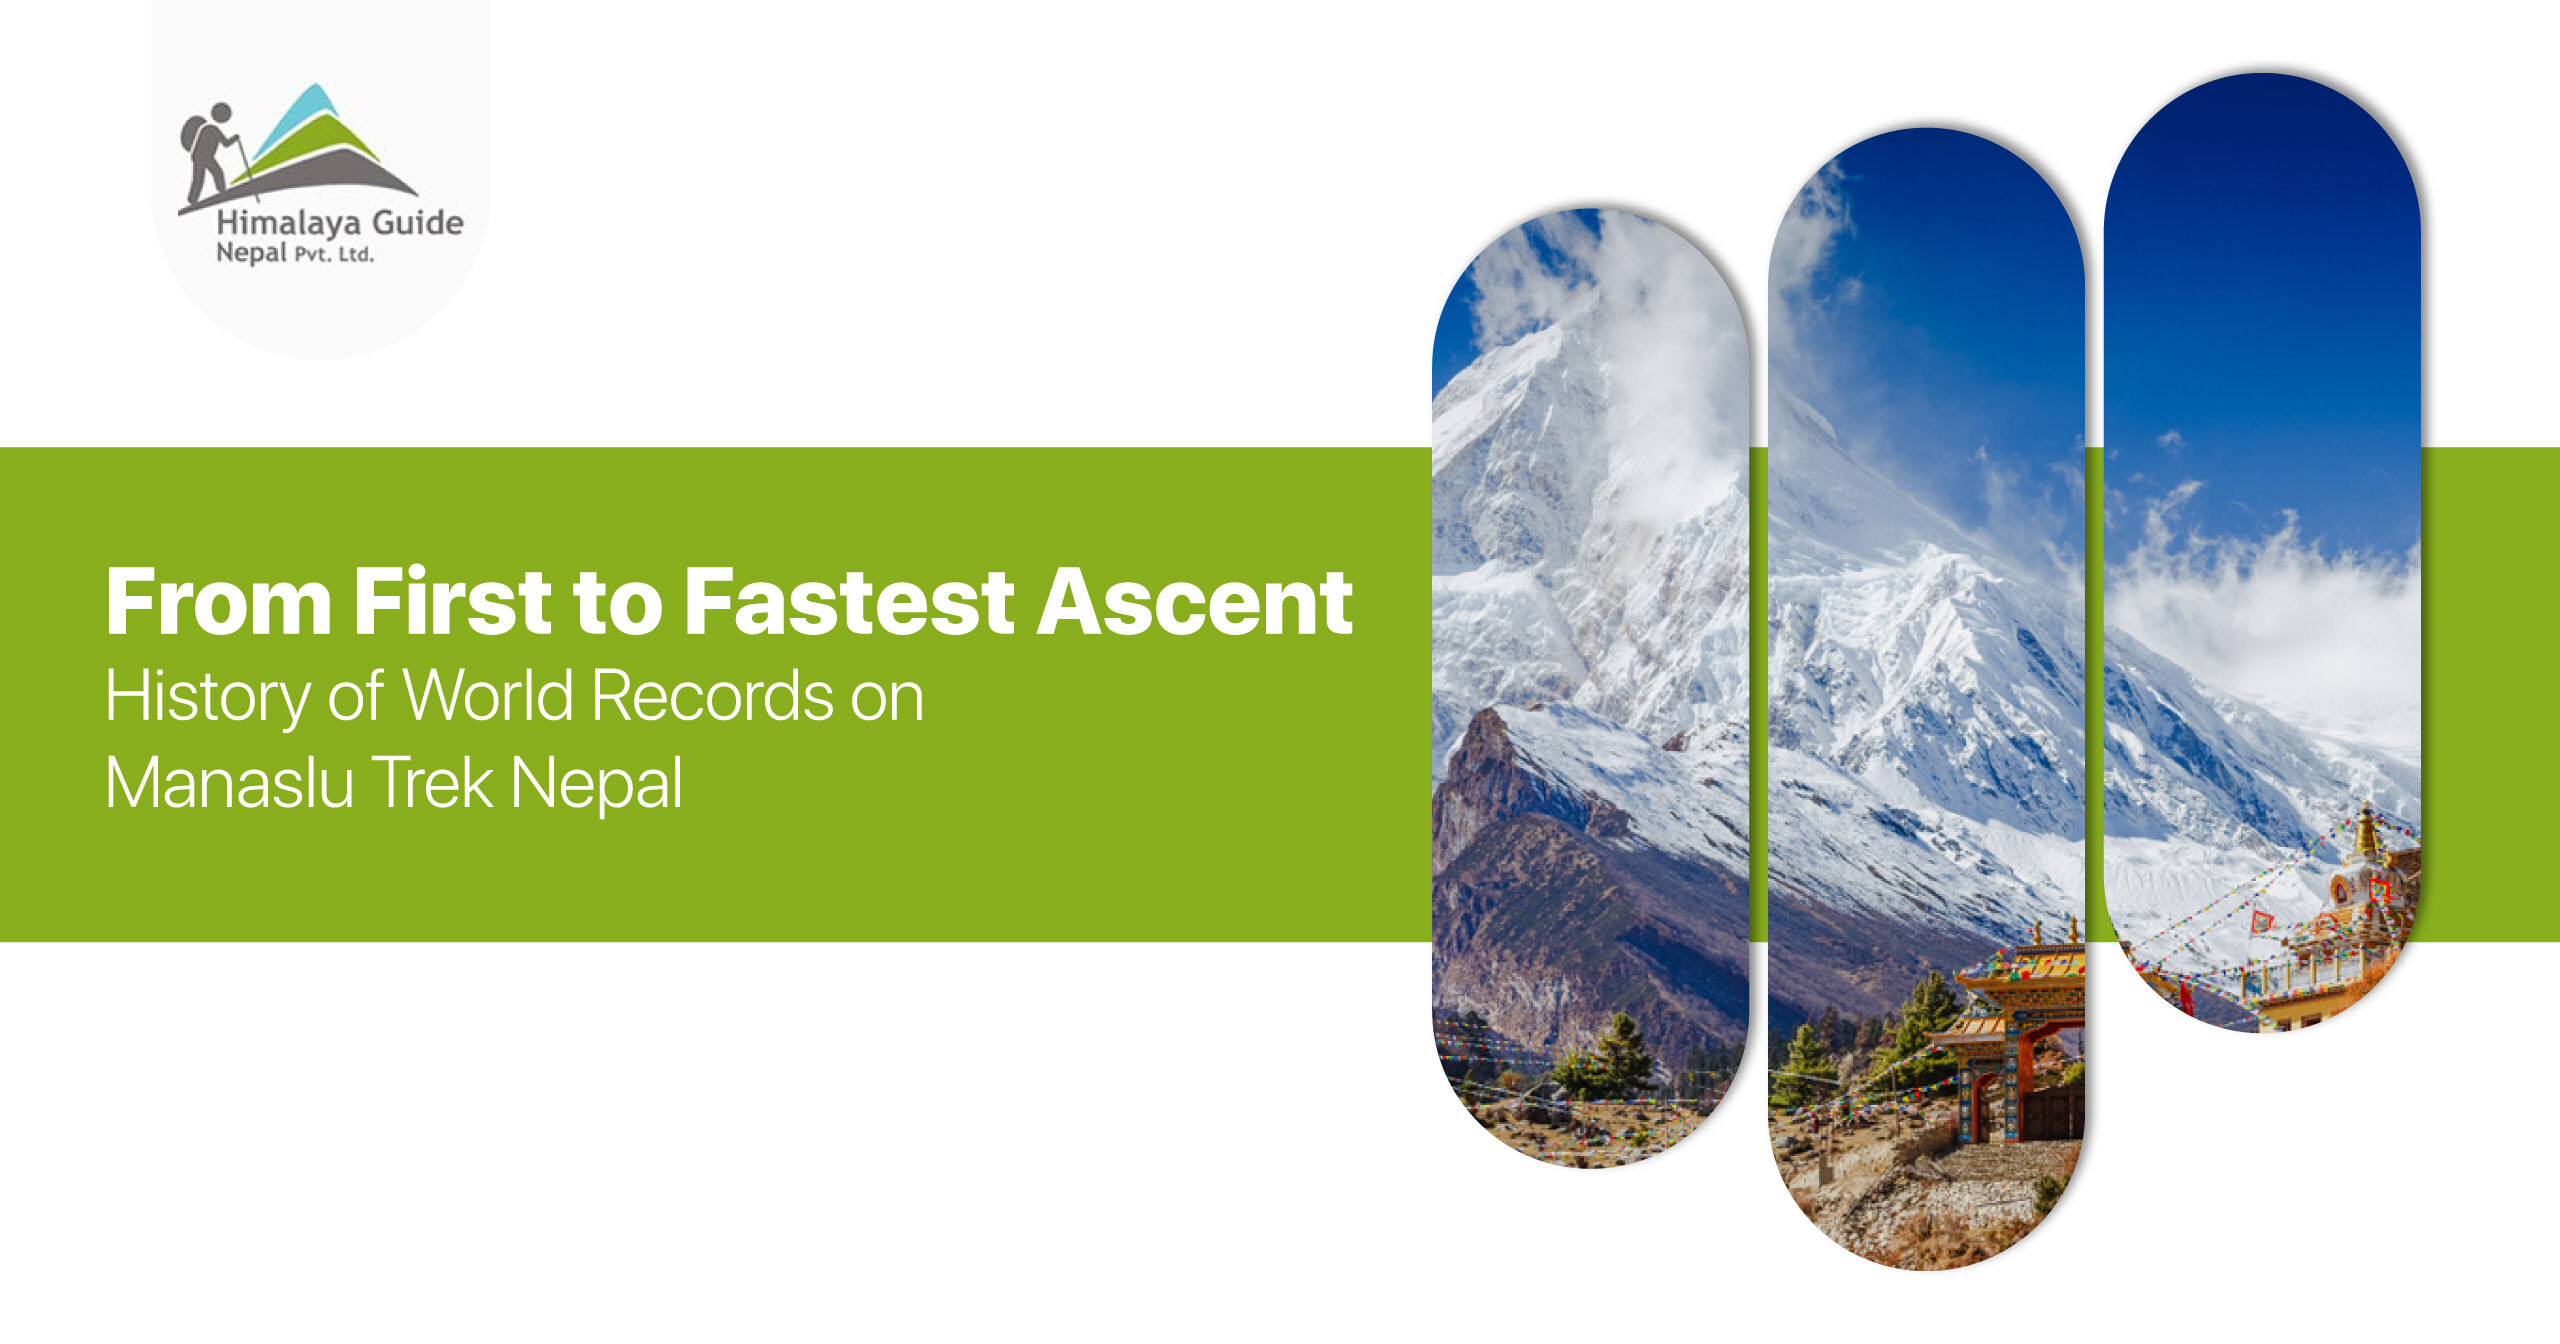 From First to Fastest Ascent: History of World Records on Manaslu Trek Nepal